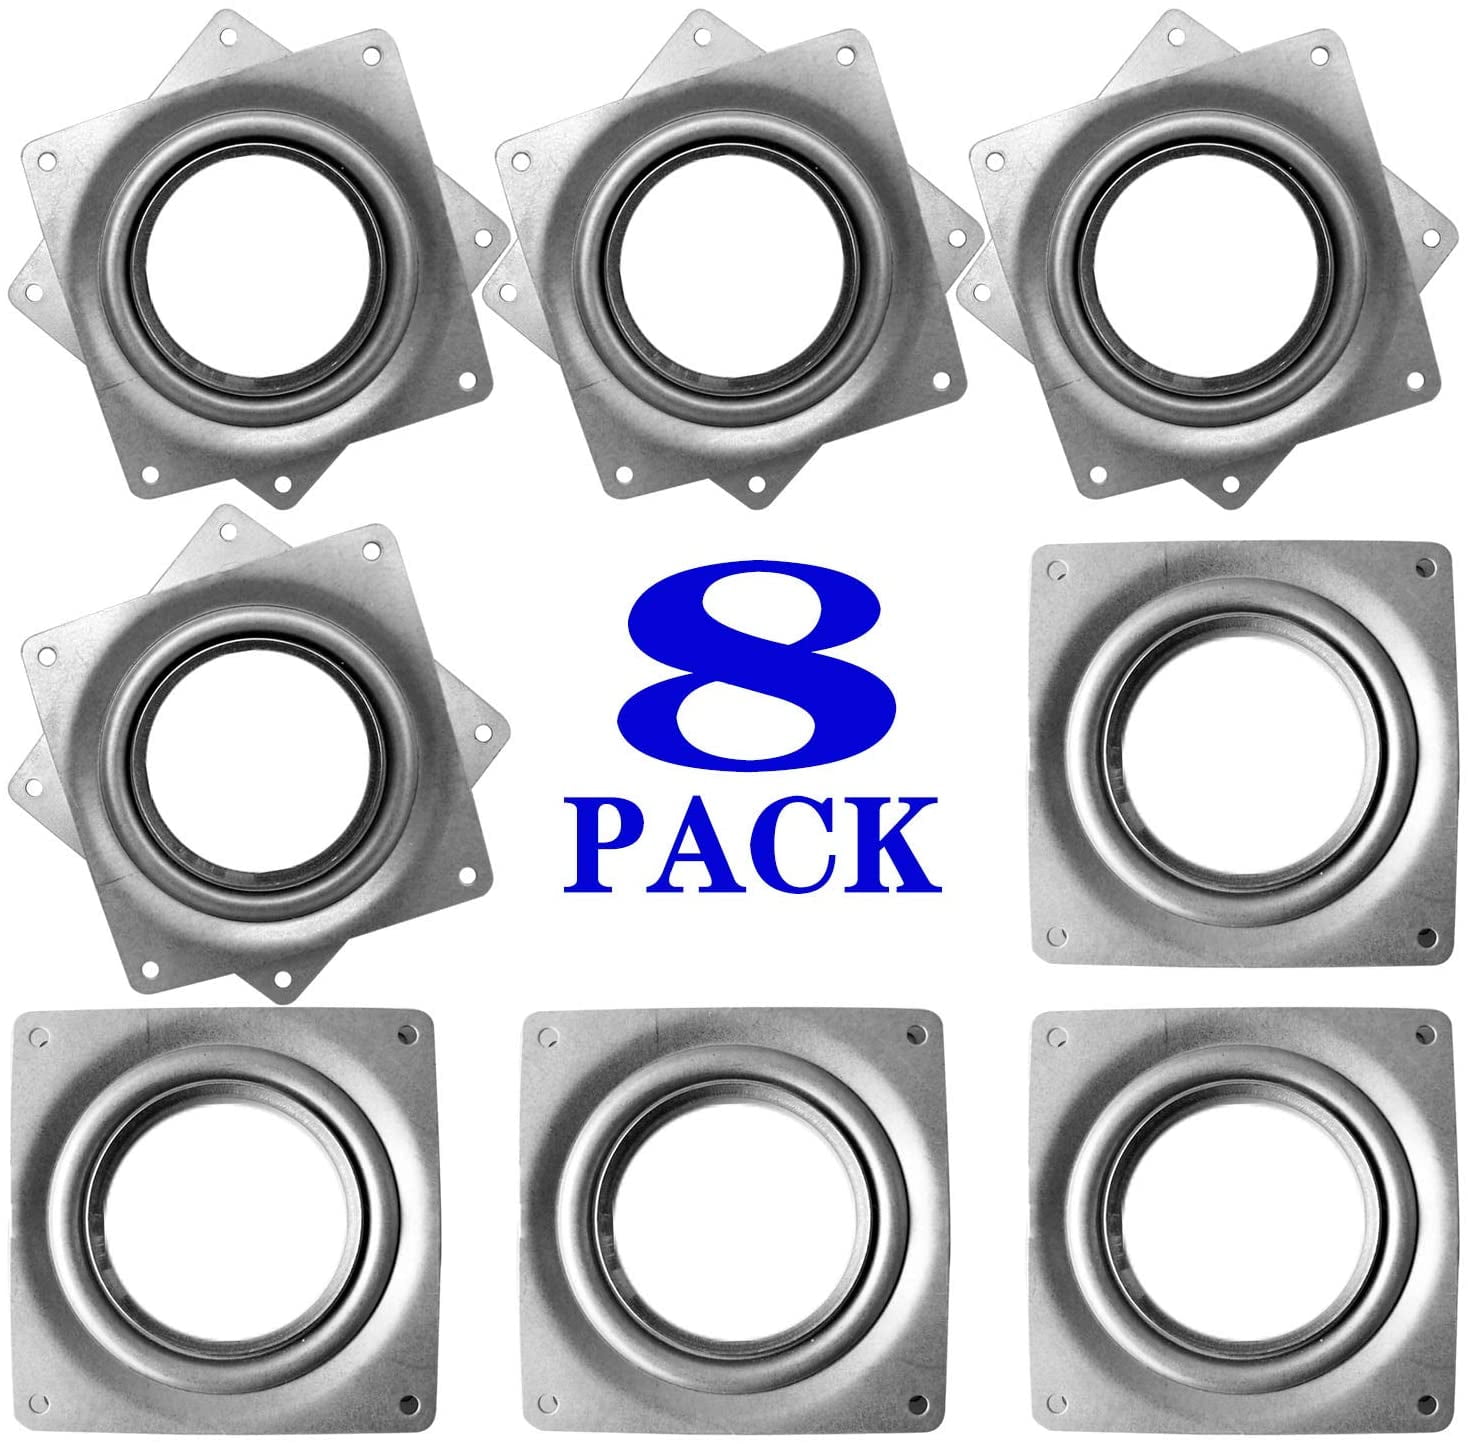 16Pcs 3 Lazy Susan Turntable Bearings Rotating Bearing Plate with 150 Pounds Capacity 5/16 Inch Thick Zinc-Plated Silver Lazy Susan Swivel Plate 